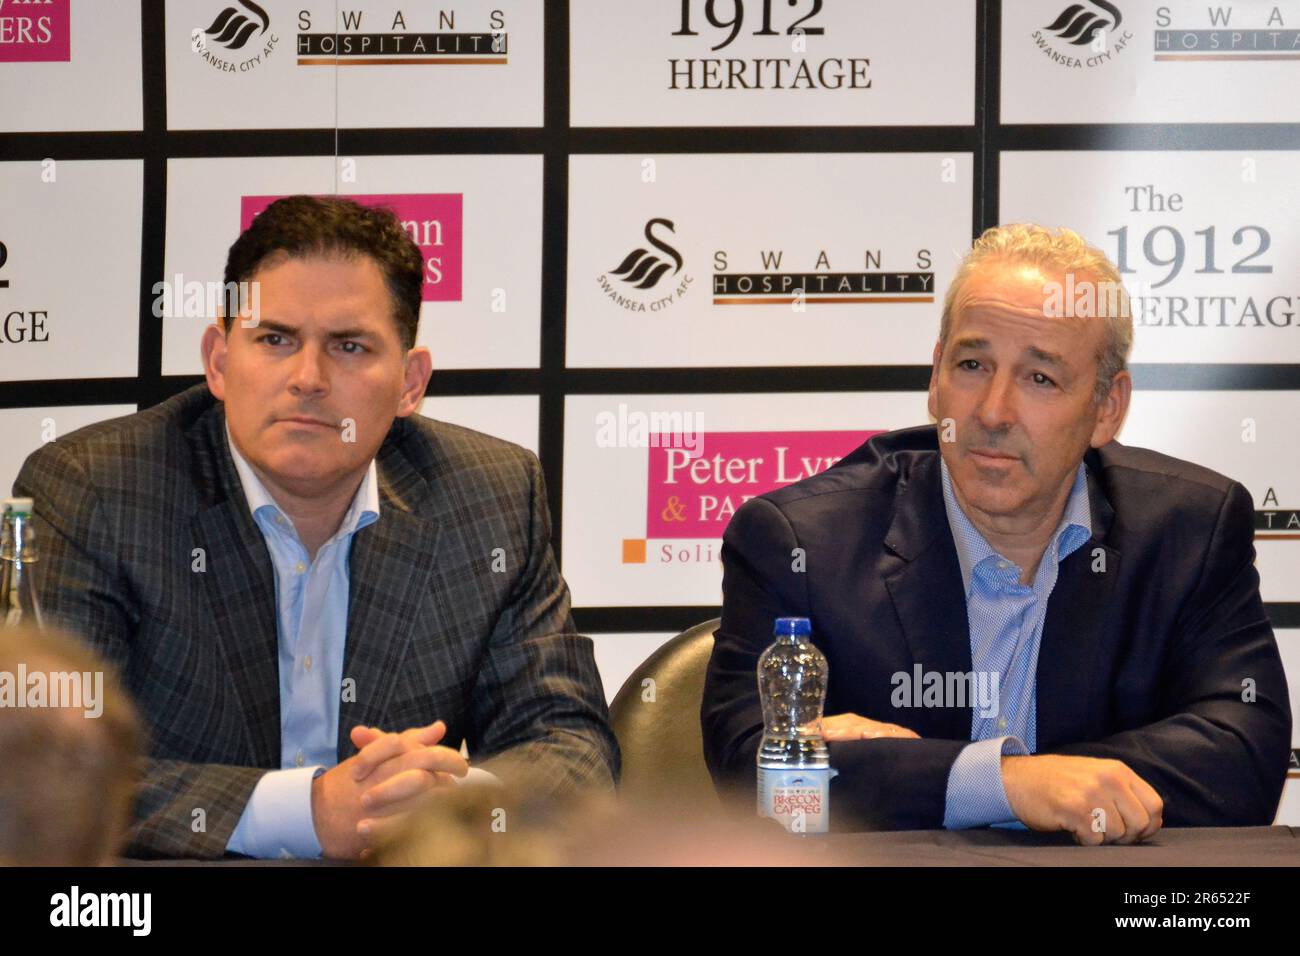 Swansea, Wales. 4 April 2017. Swansea City co-owner Jason Levien (left) and Swansea City co-owner Steve Kaplan during the Swansea City Supporters' Trust Fans Forum at the Liberty Stadium in Swansea, Wales, UK on 4 April 2017. Credit: Duncan Thomas/Majestic Media. Stock Photo